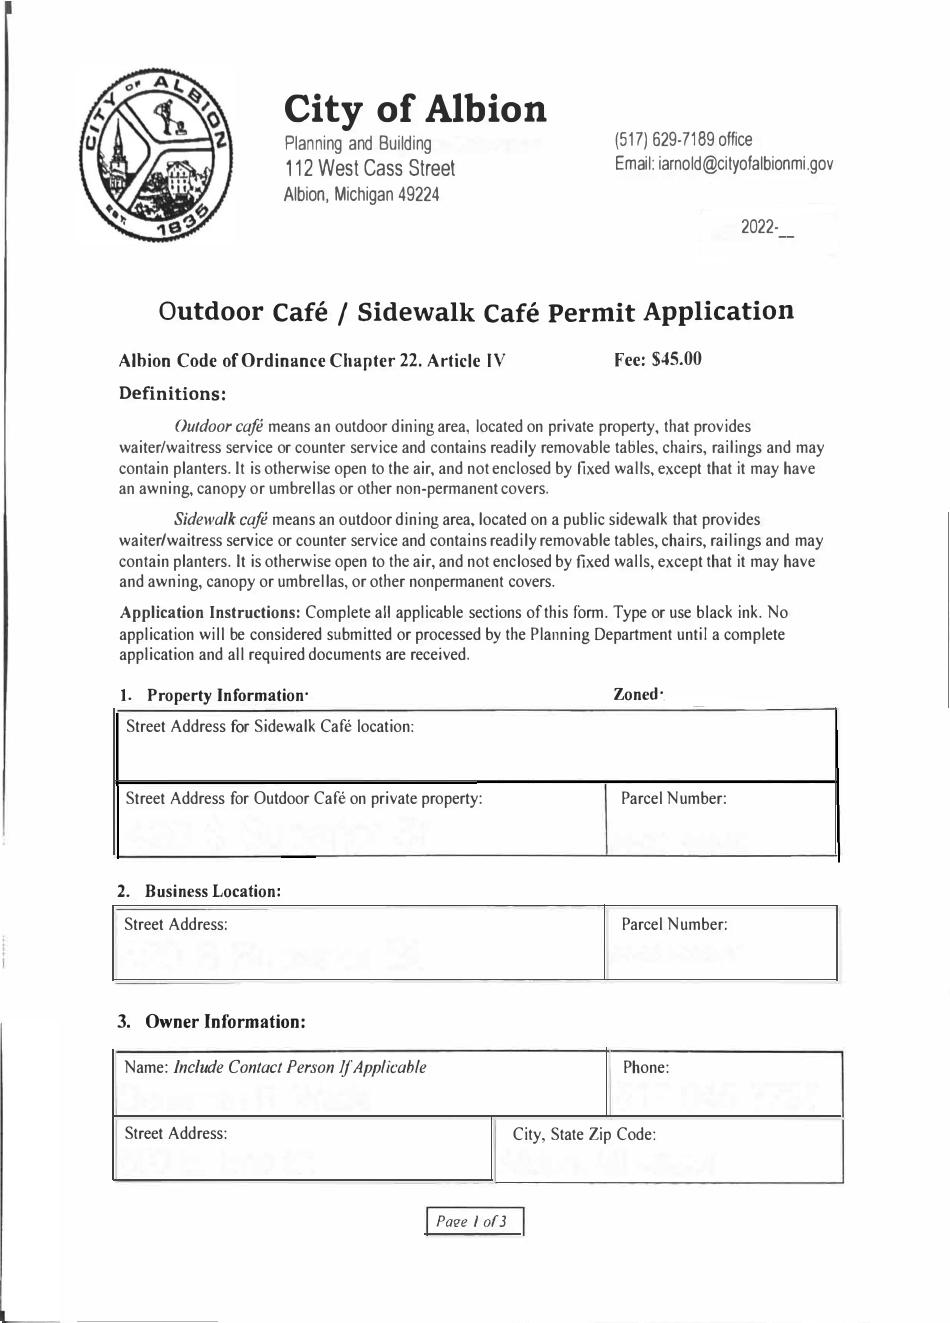 Outdoor Cafe / Sidewalk Cafe Permit Application - City of Albion, Michigan, Page 1